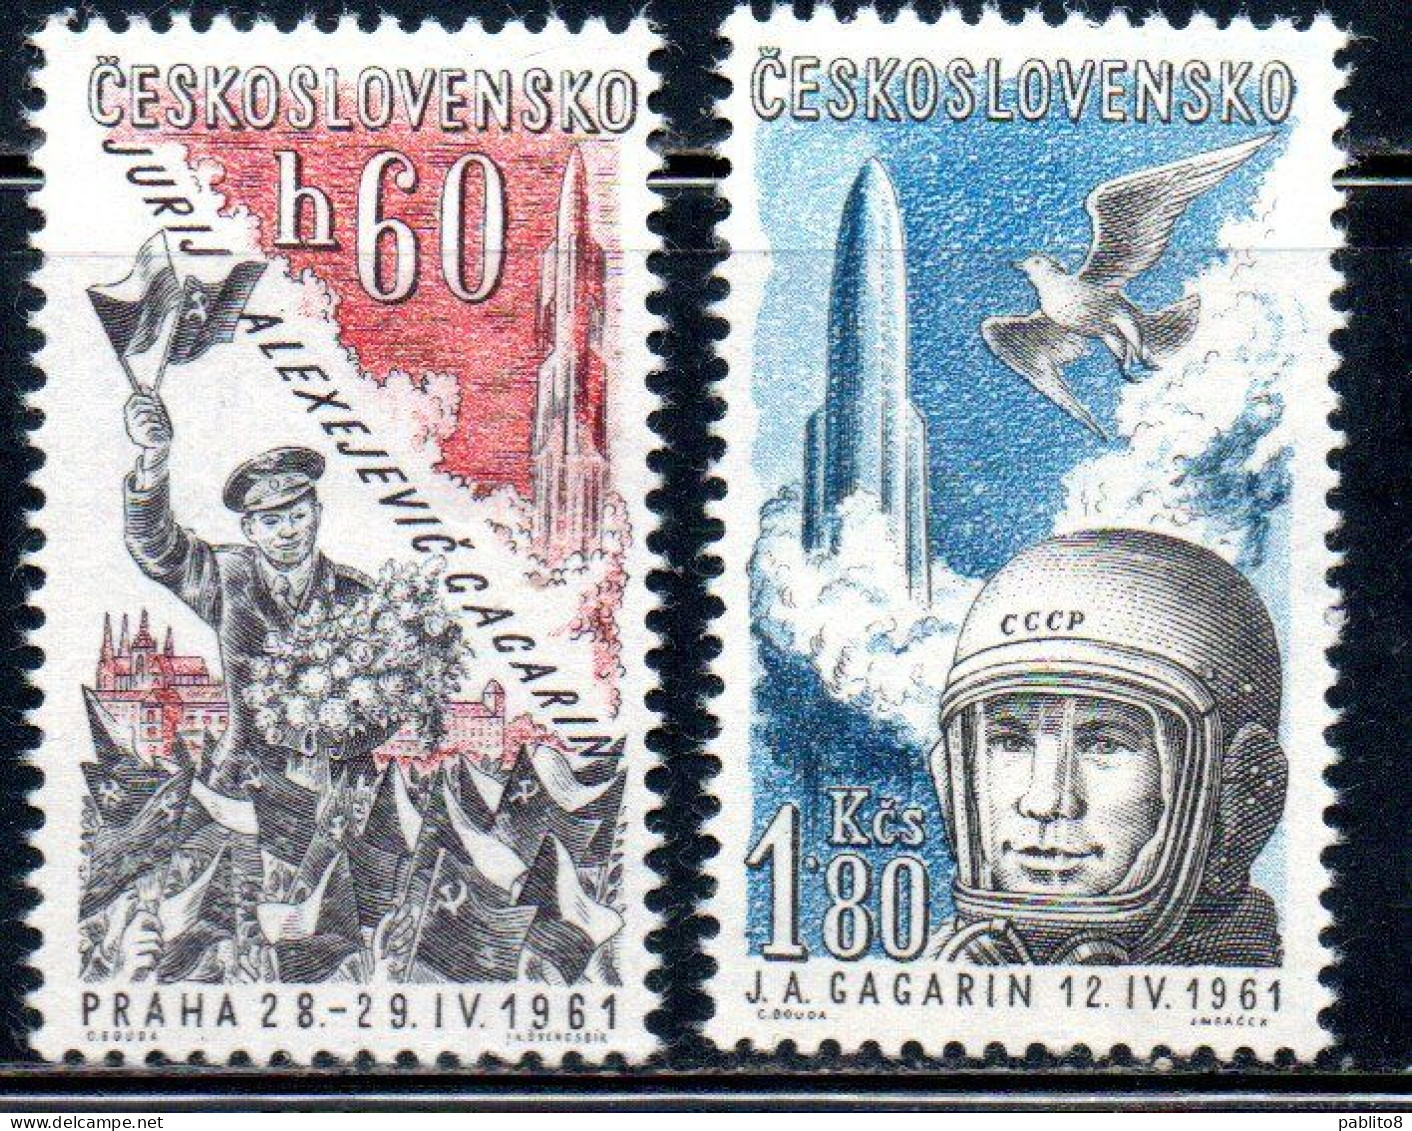 CZECHOSLOVAKIA CECOSLOVACCHIA 1961 AIR POST MAIL AIRMAIL COMMEMORATES MAY GAGARIN' VISIT COMPLETE SET SERIE COMPLETA MNH - Corréo Aéreo